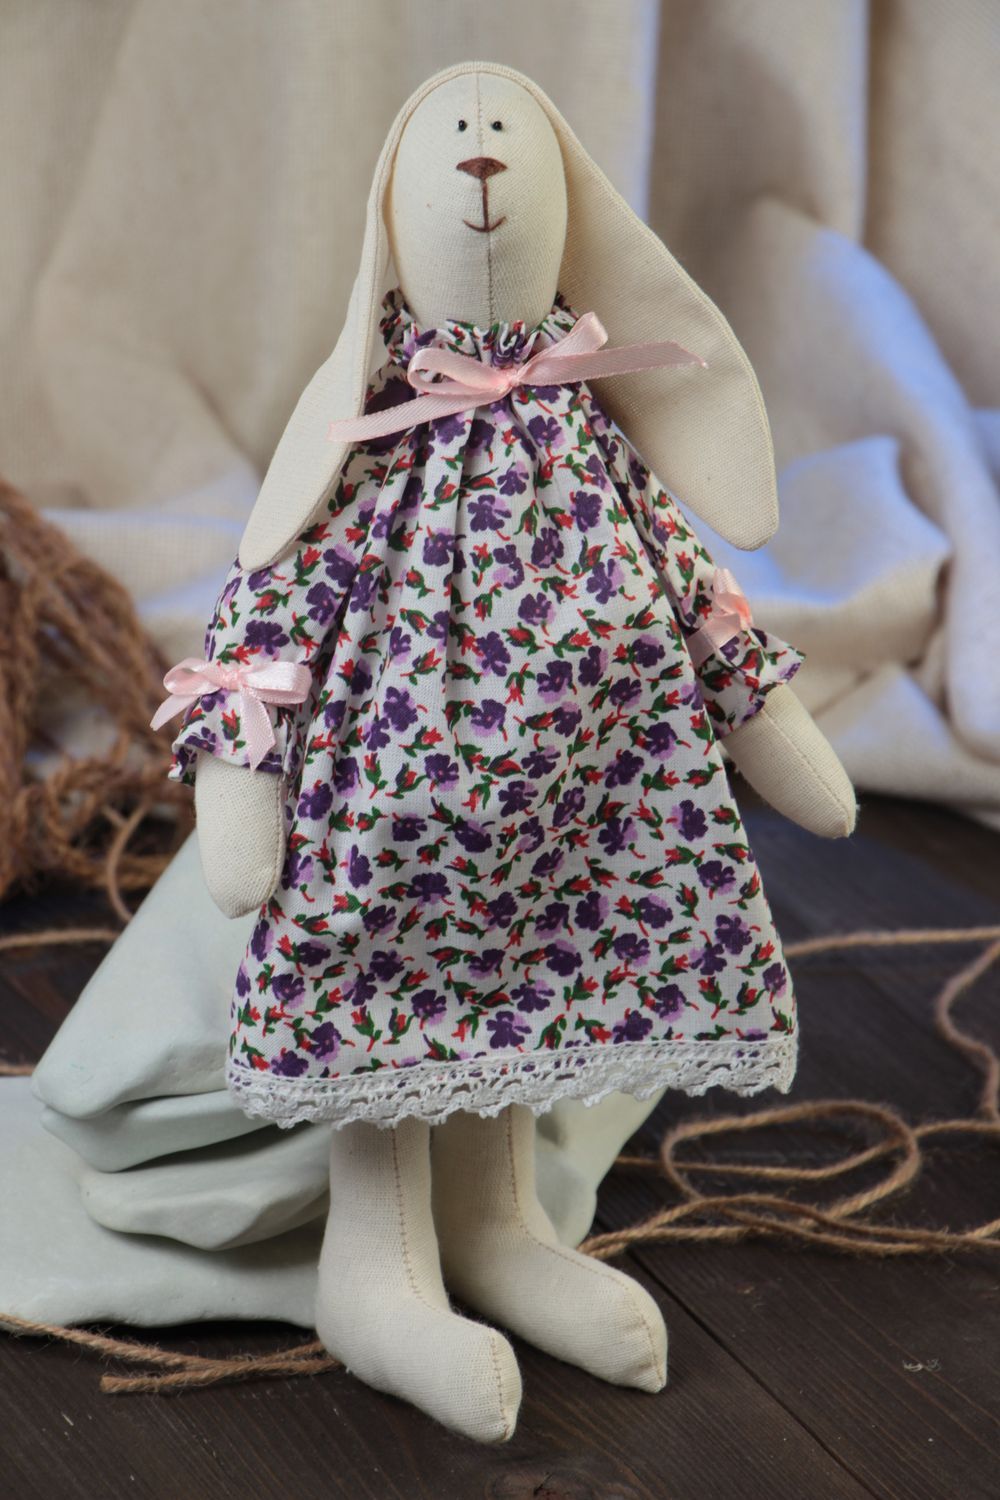 Handmade small fabric soft toy rabbit girl in dress with violet floral pattern photo 1